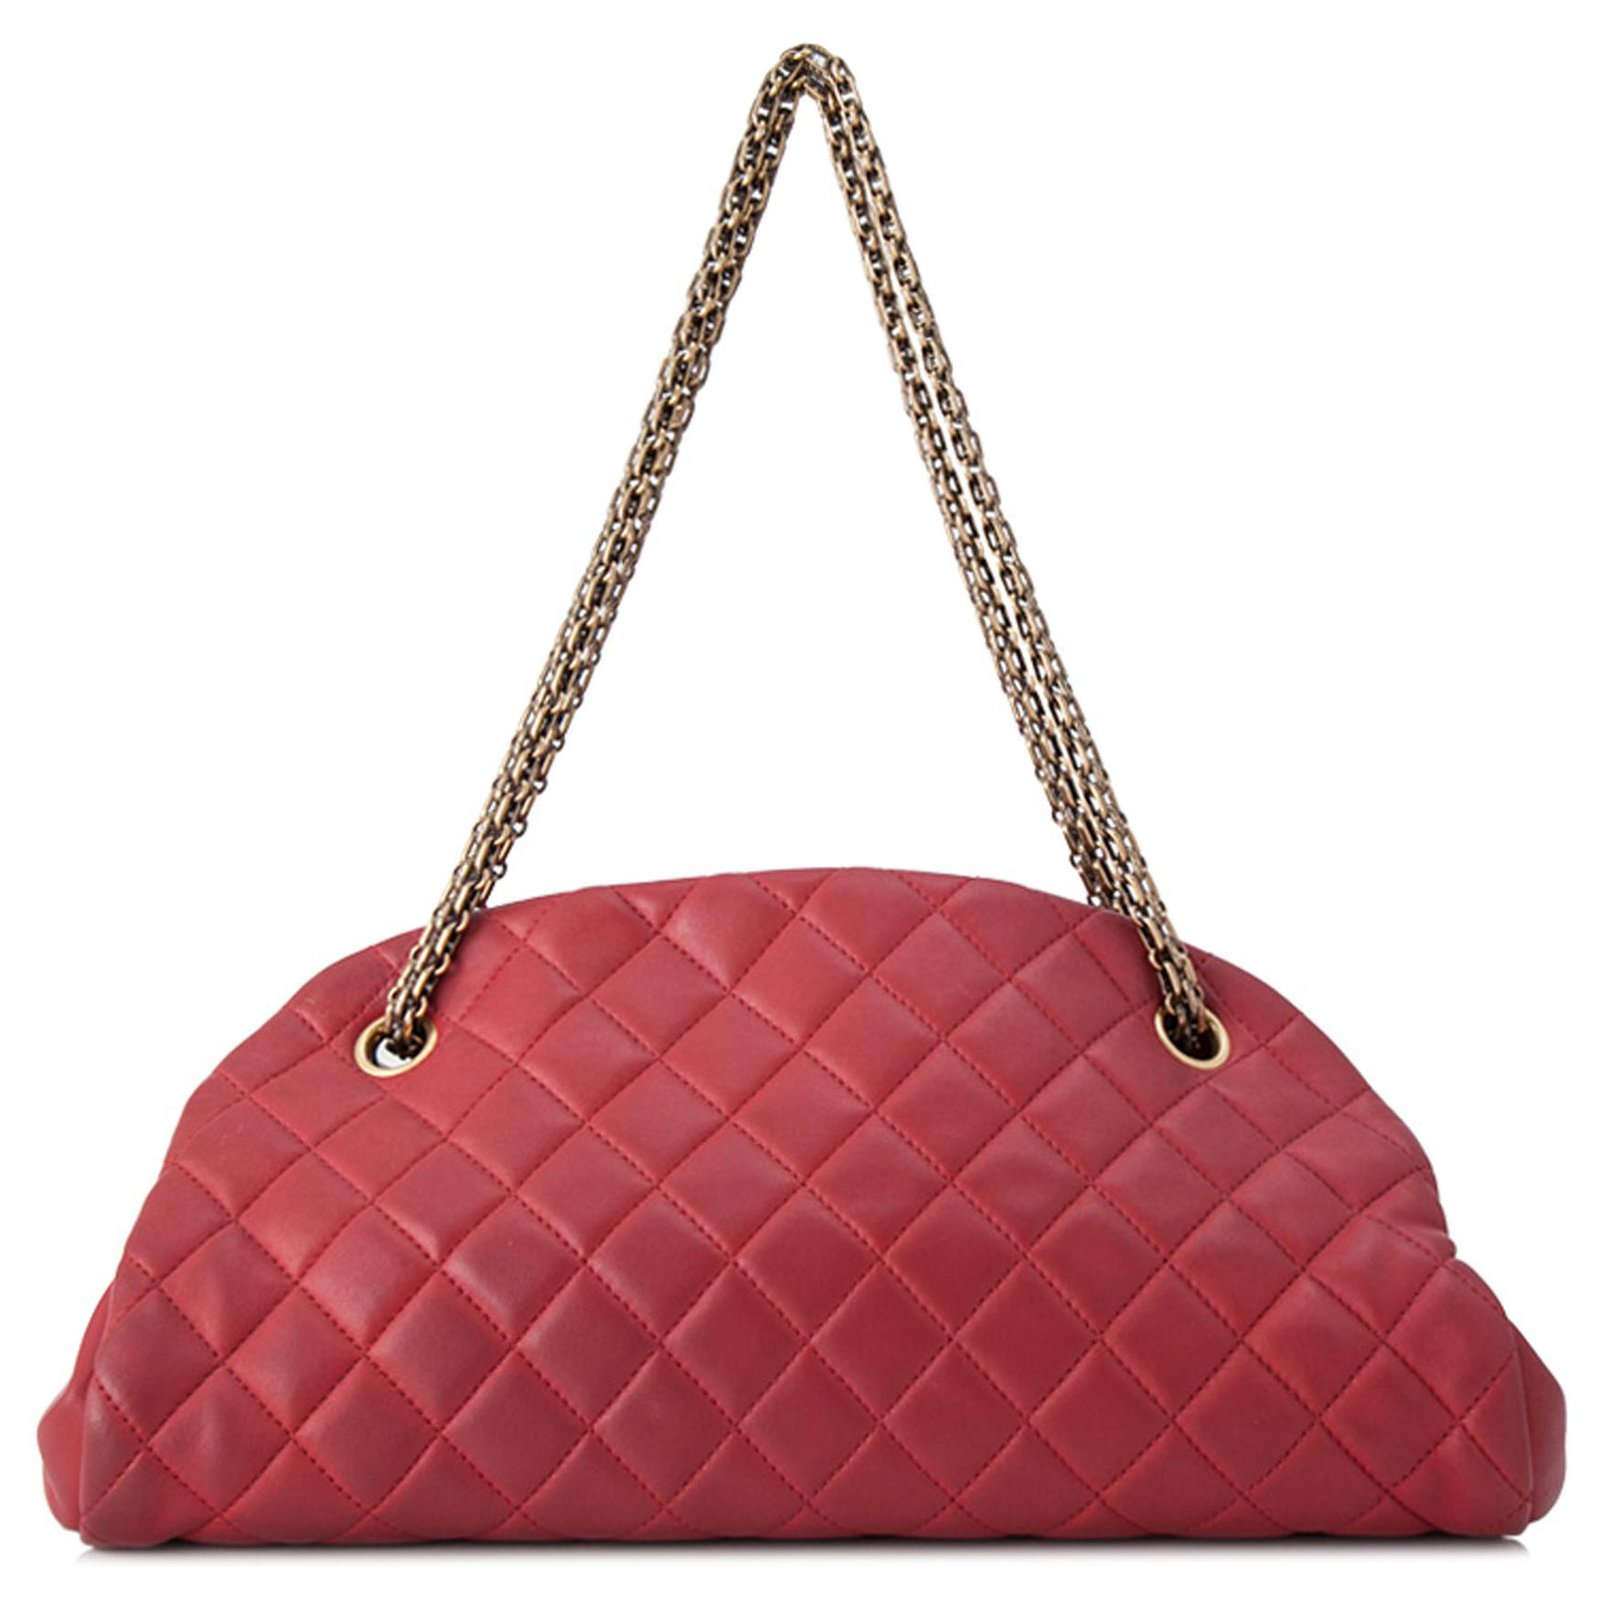 Bowling bag leather crossbody bag Chanel Red in Leather - 31524158